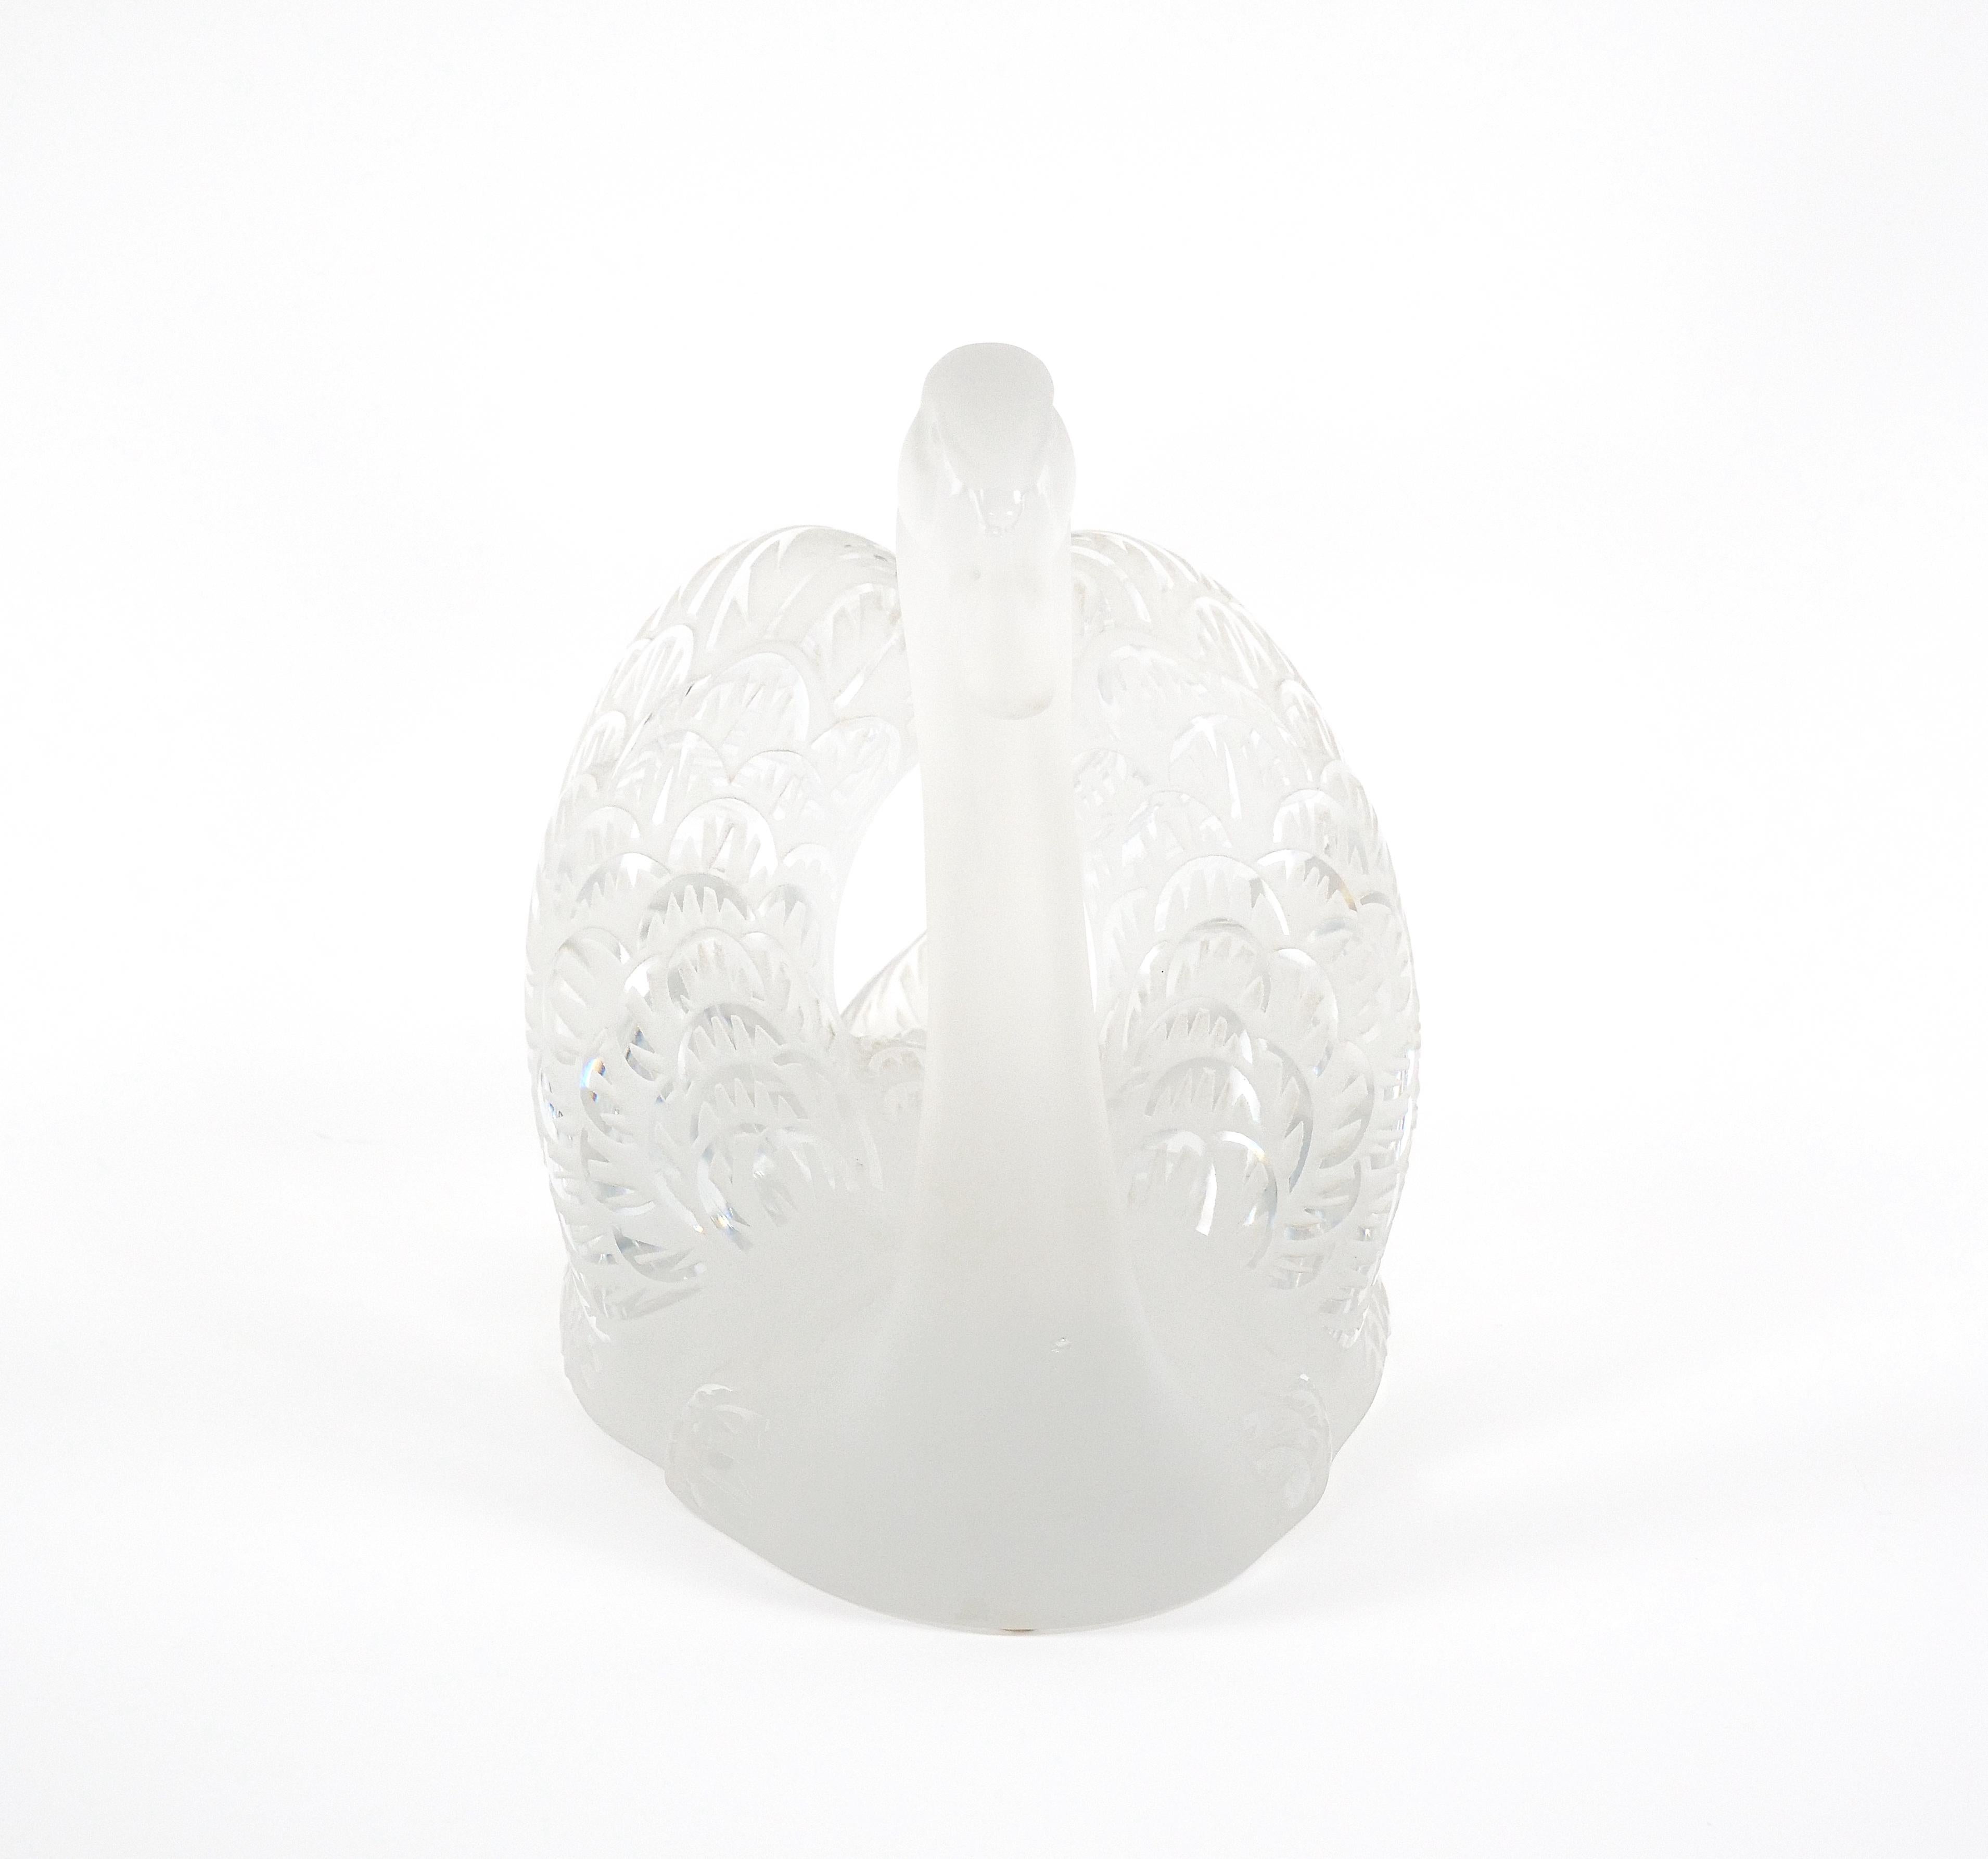  Lalique Crystal Frosted Head Down Swan Sculpture Resting On Mirrored Plateau en vente 5